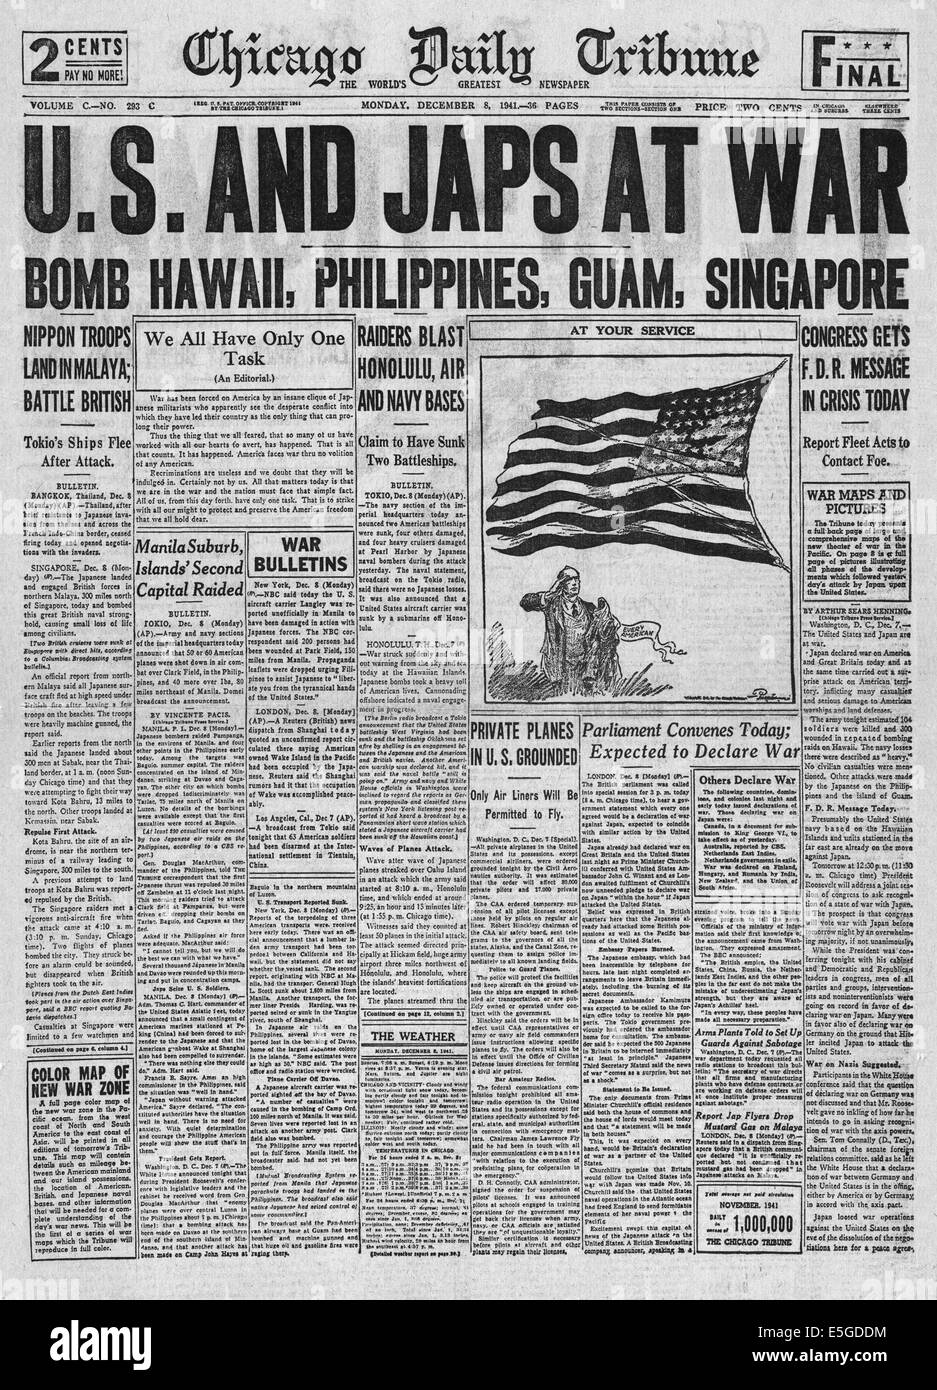 1941 Chicago Daily Tribune Front Page Reporting The Japanese Attack On